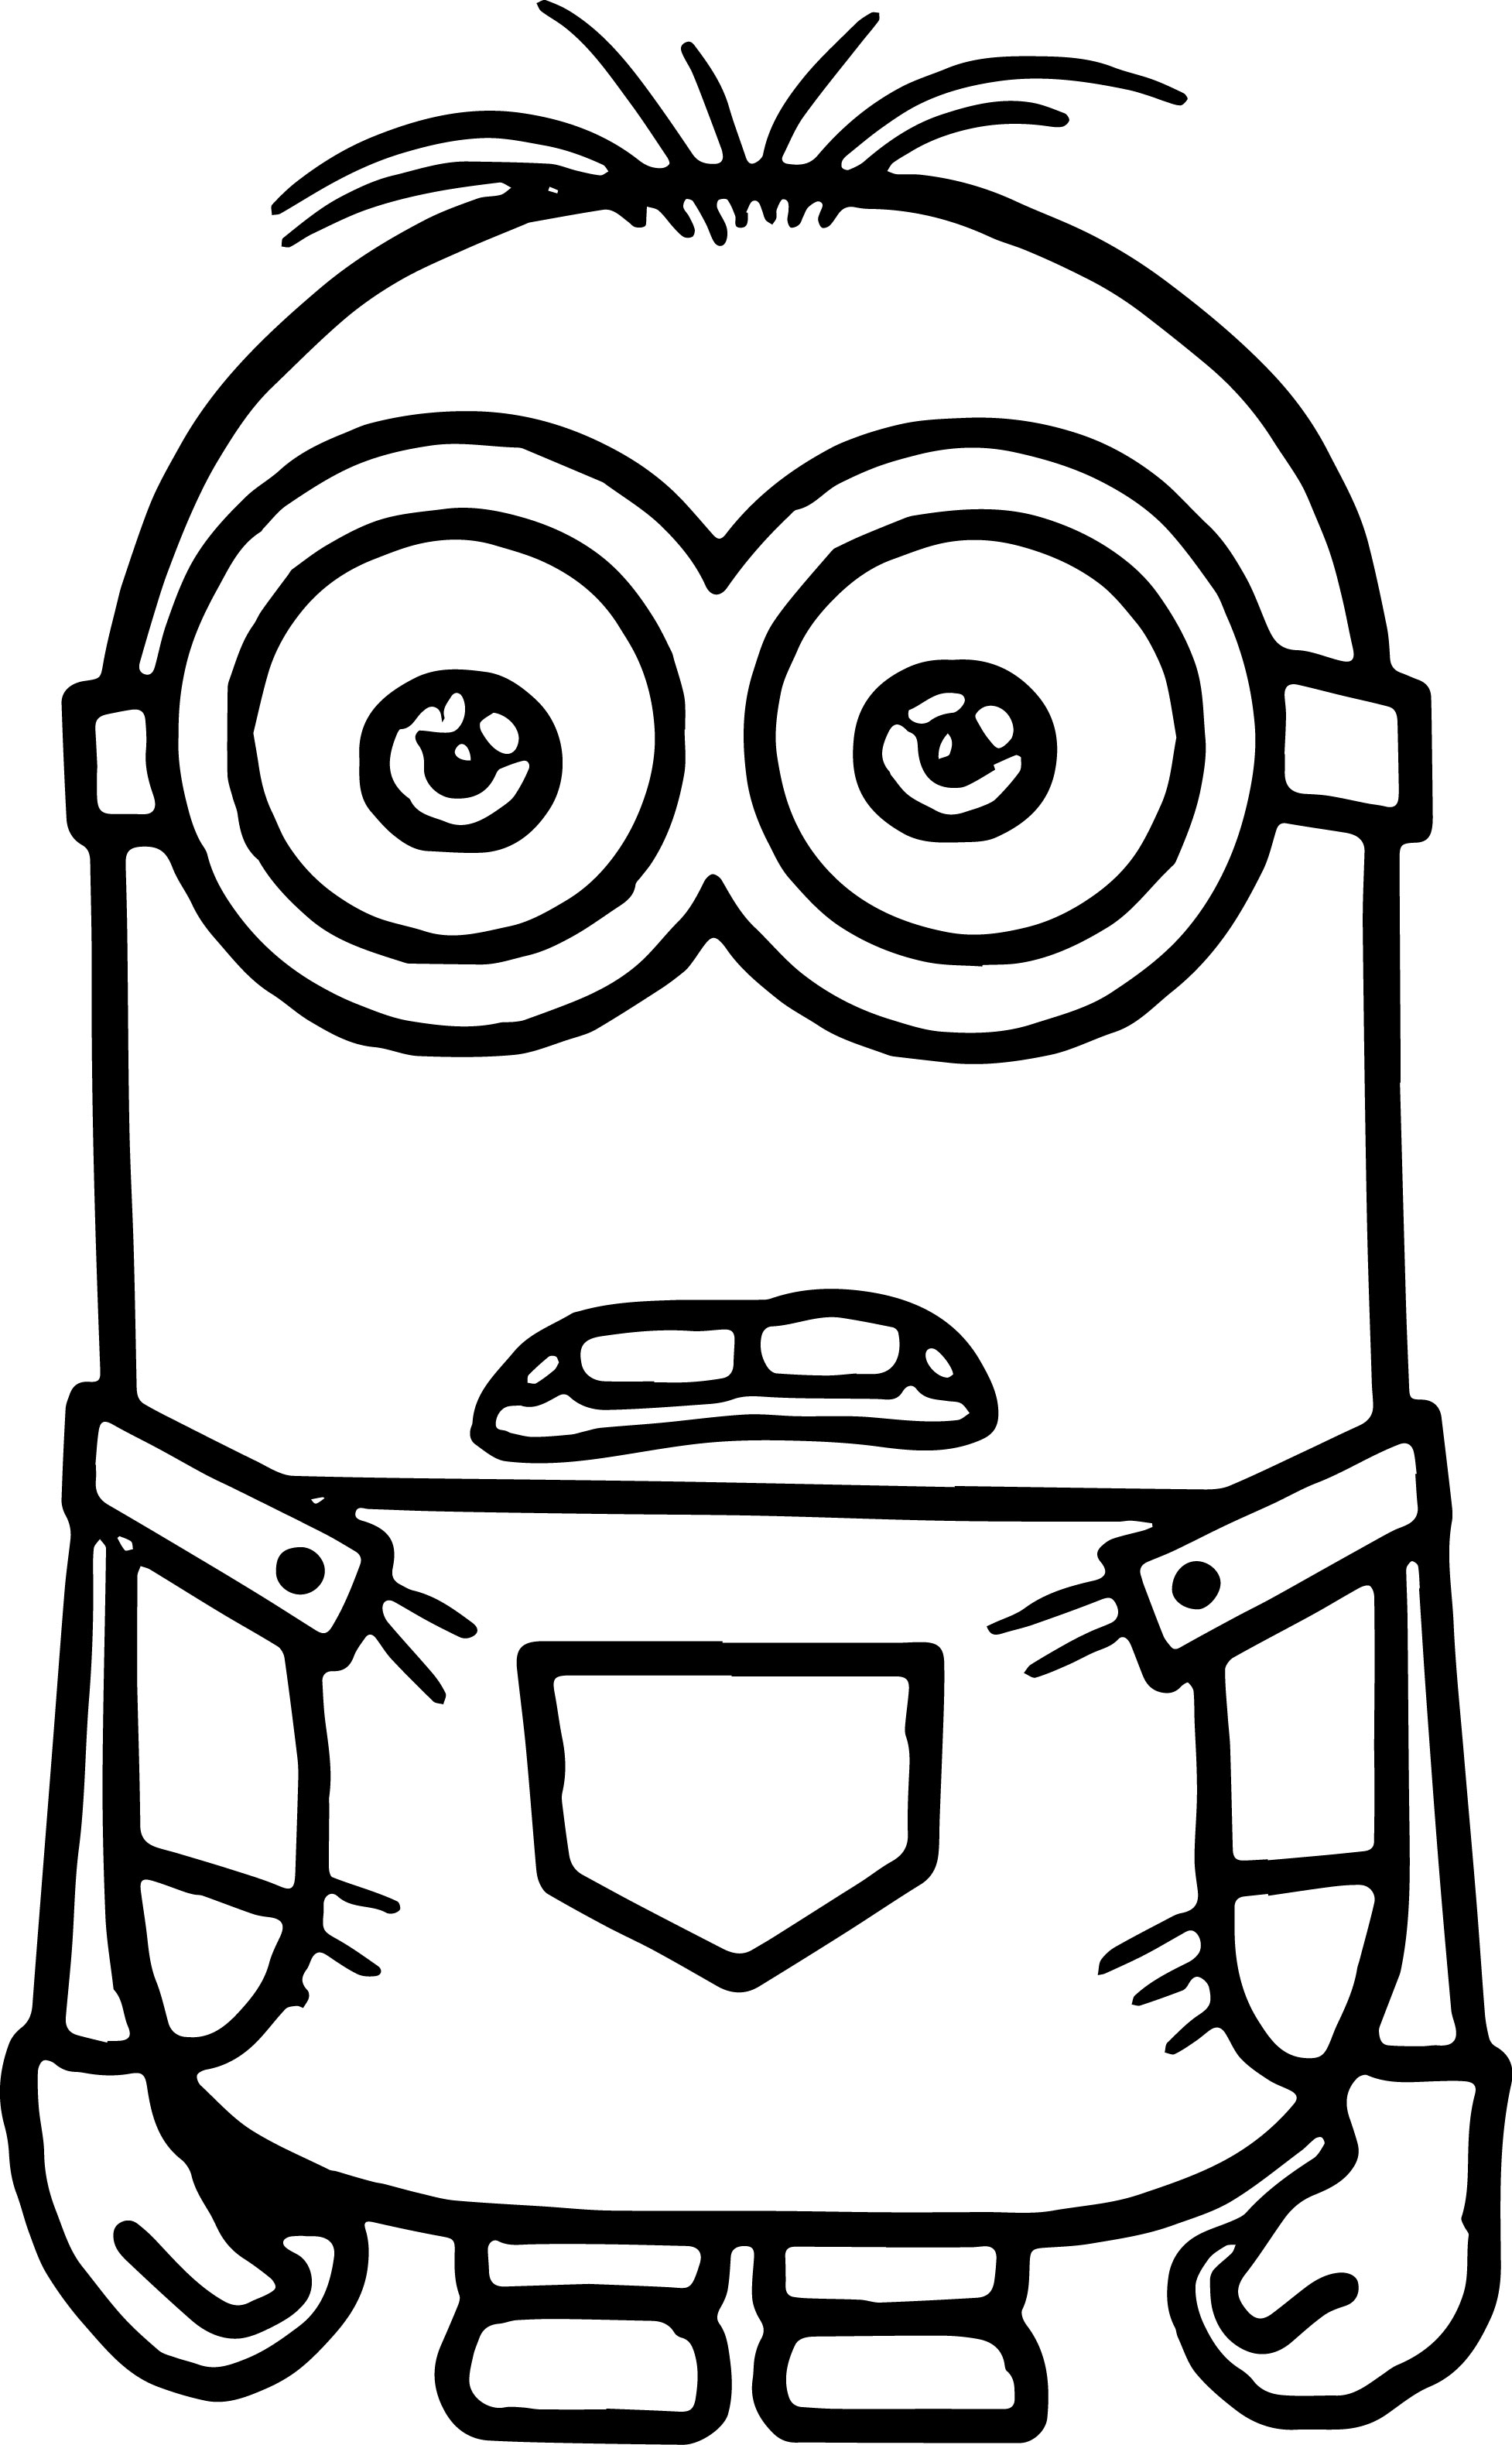 minion-coloring-pages-fotolip-rich-image-and-wallpaper